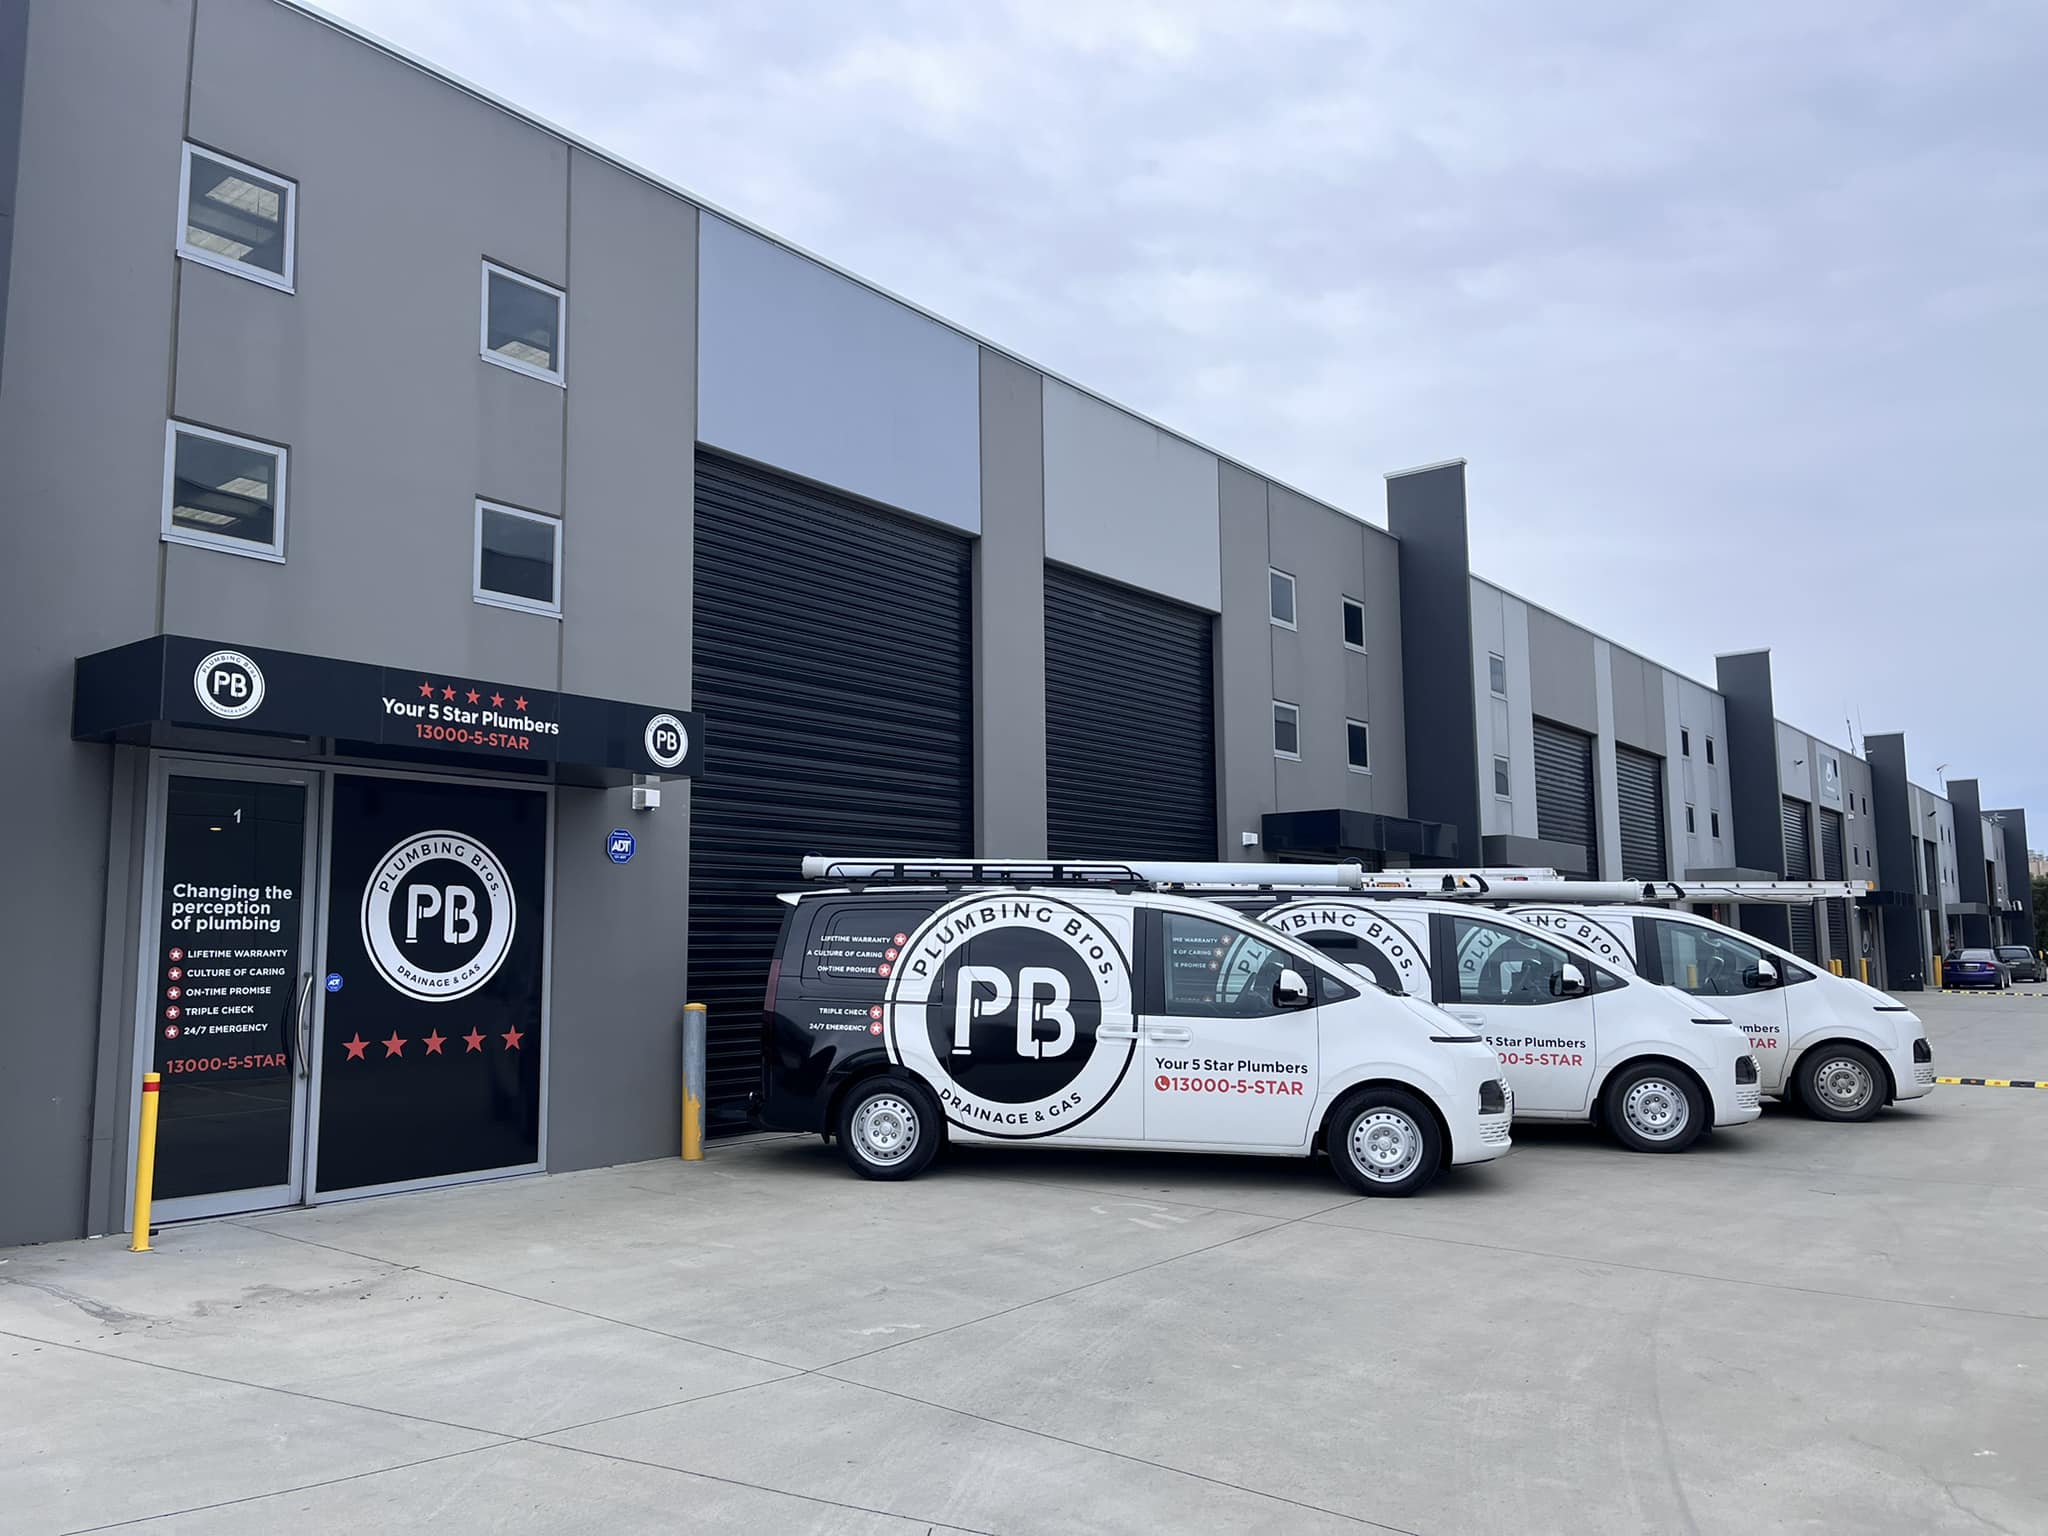 Photo of Plumbing bros Melbourne office with vehicles parked in front.